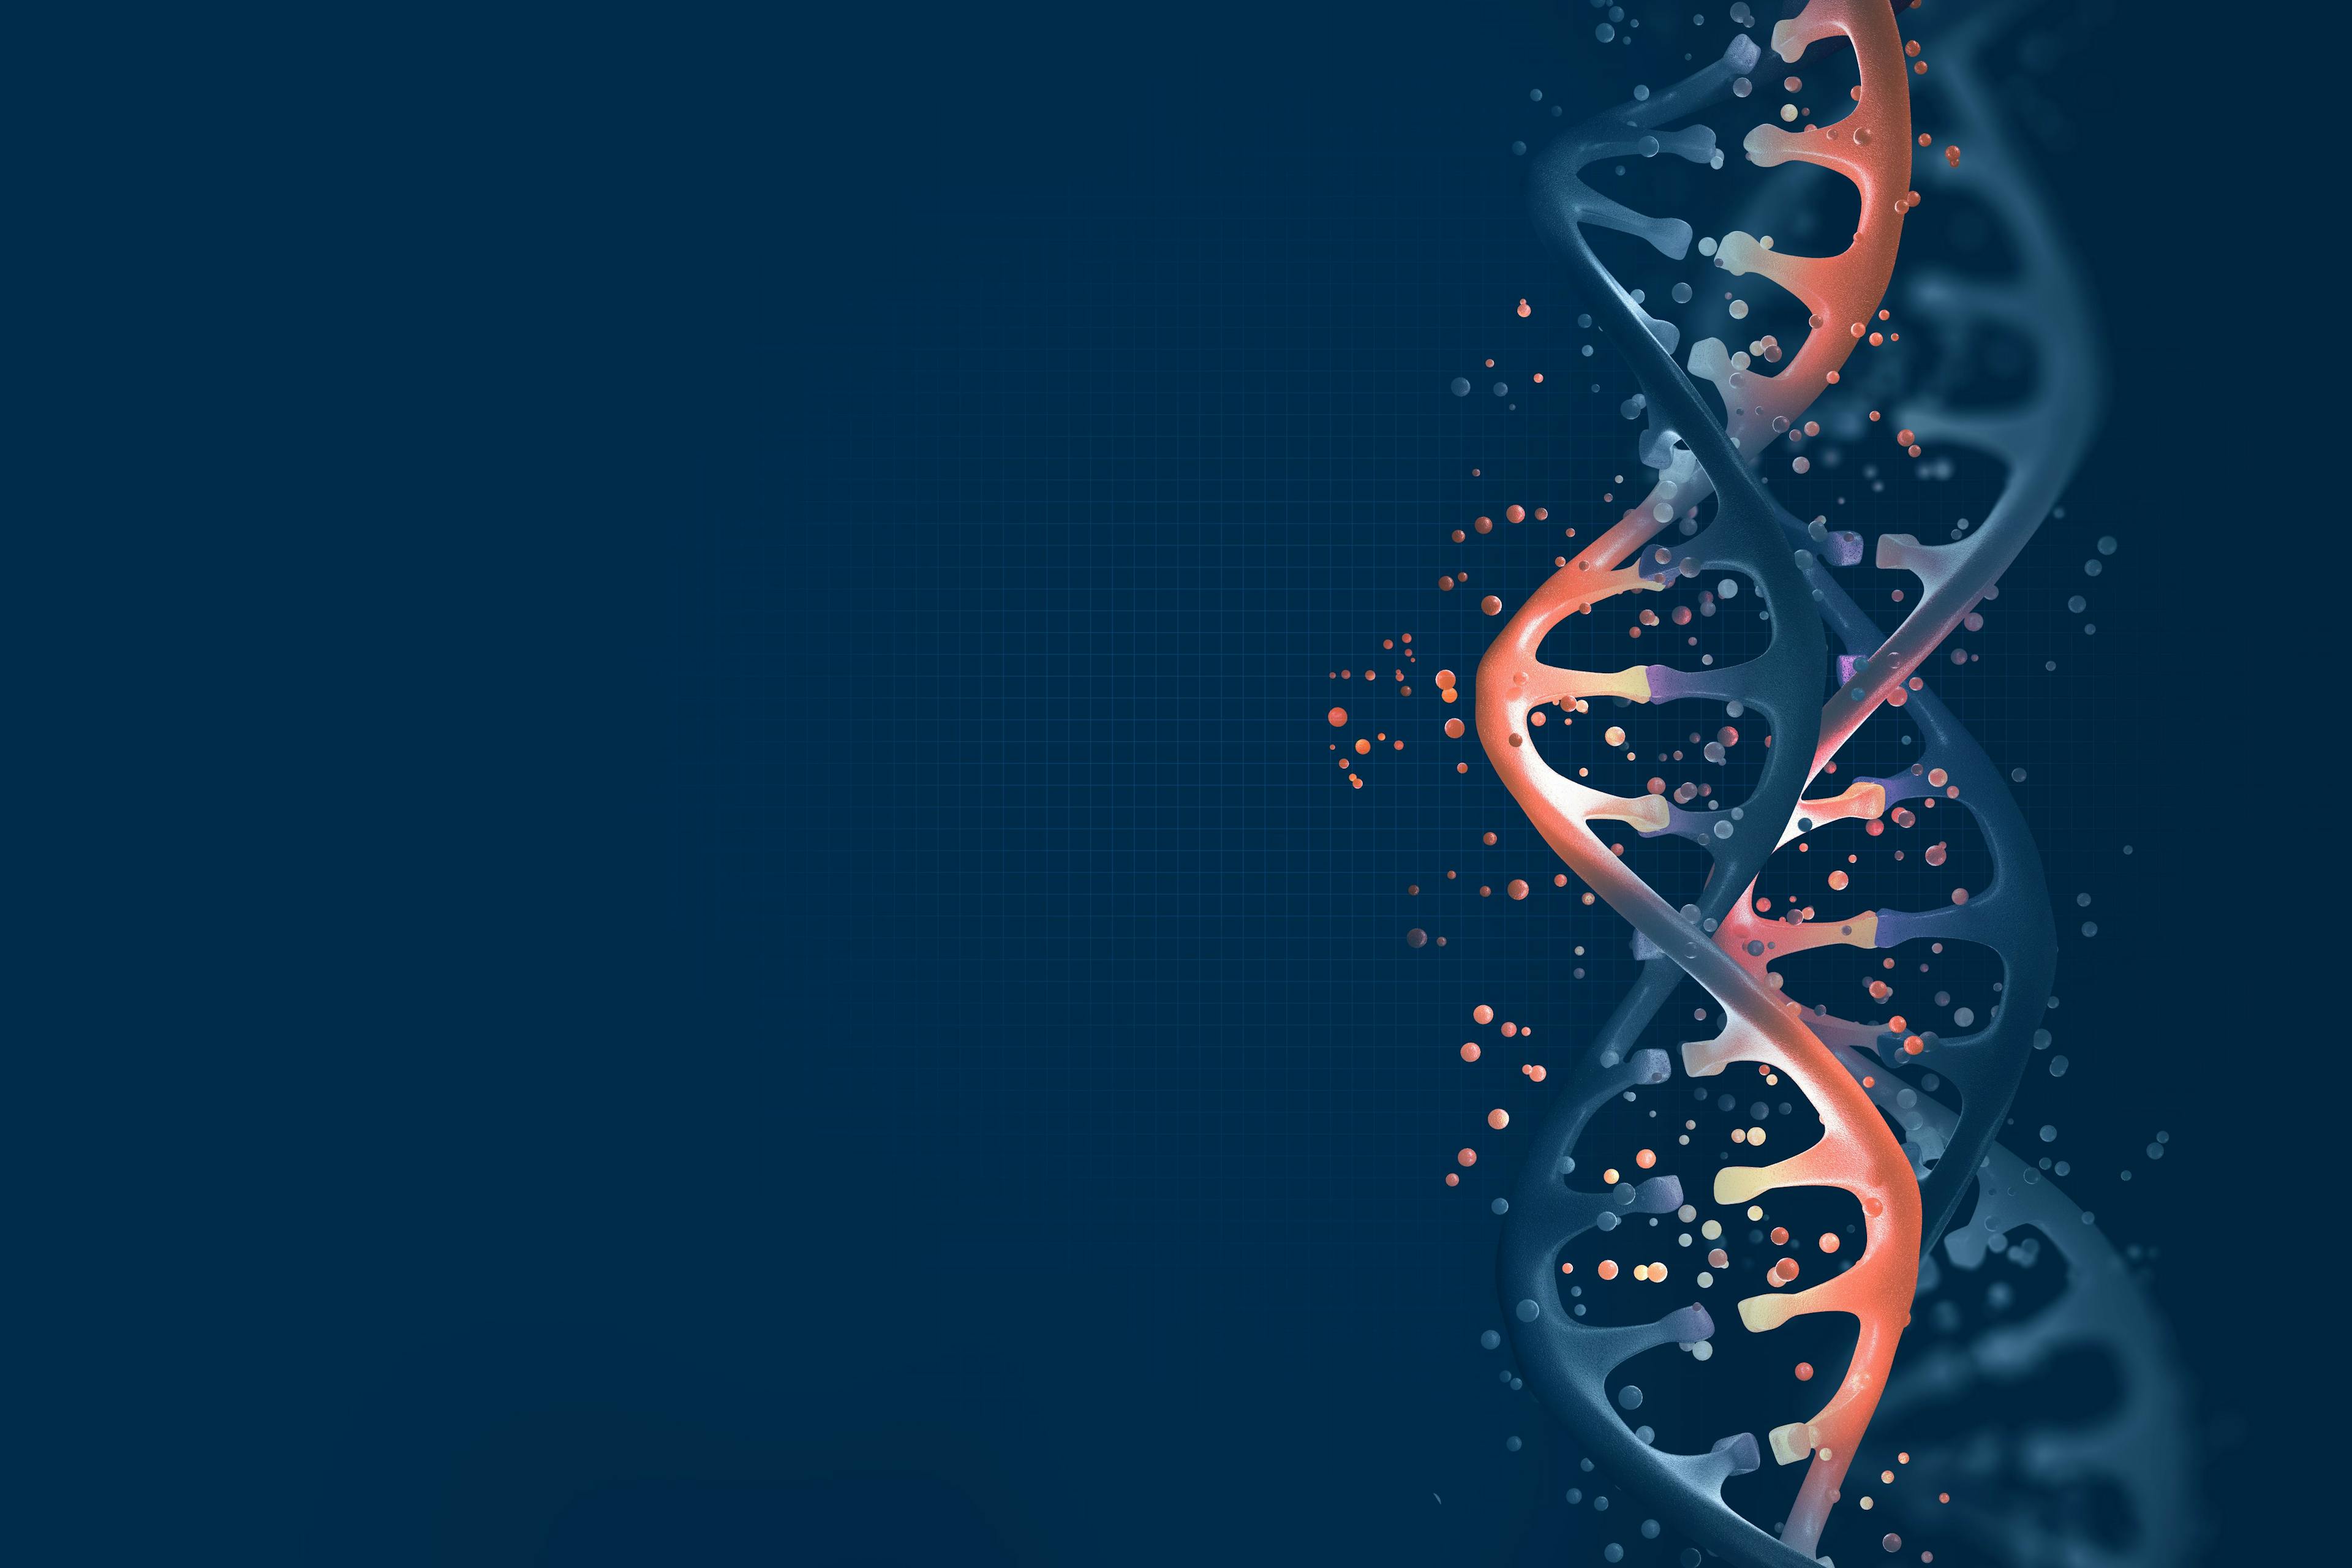 CRISPR Therapy for ATTR Amyloidosis Granted Orphan Drug Designation